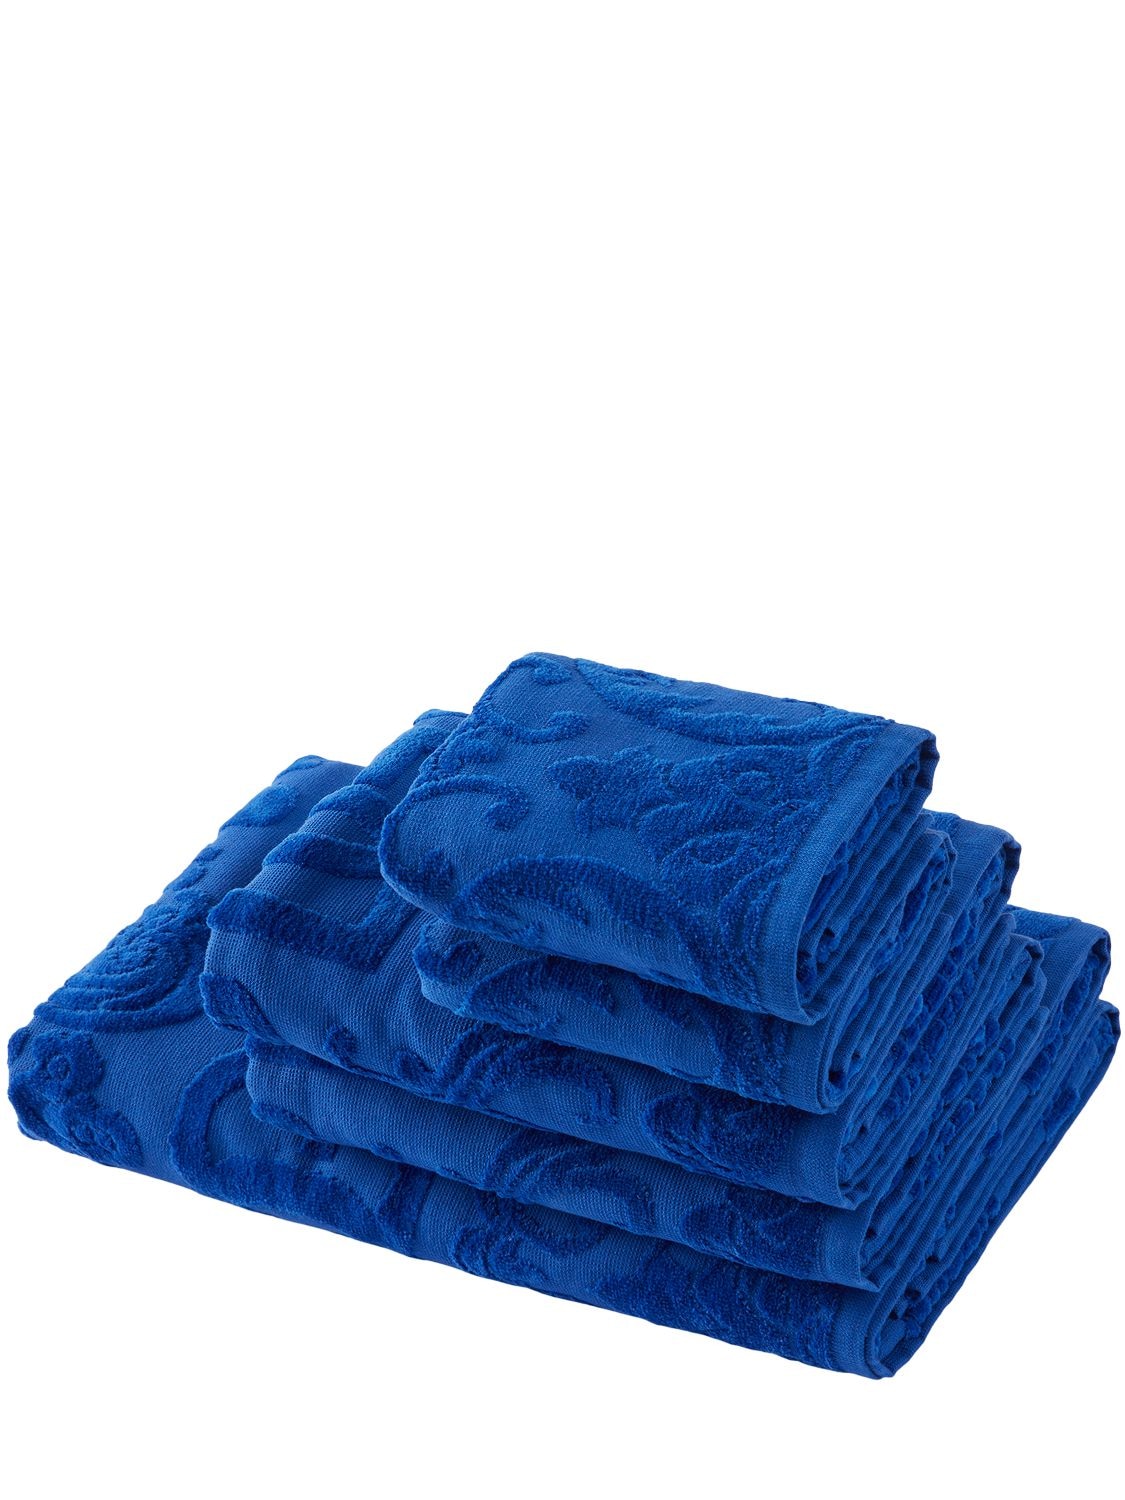 Dolce & Gabbana Set Of 5 Towels In Blue